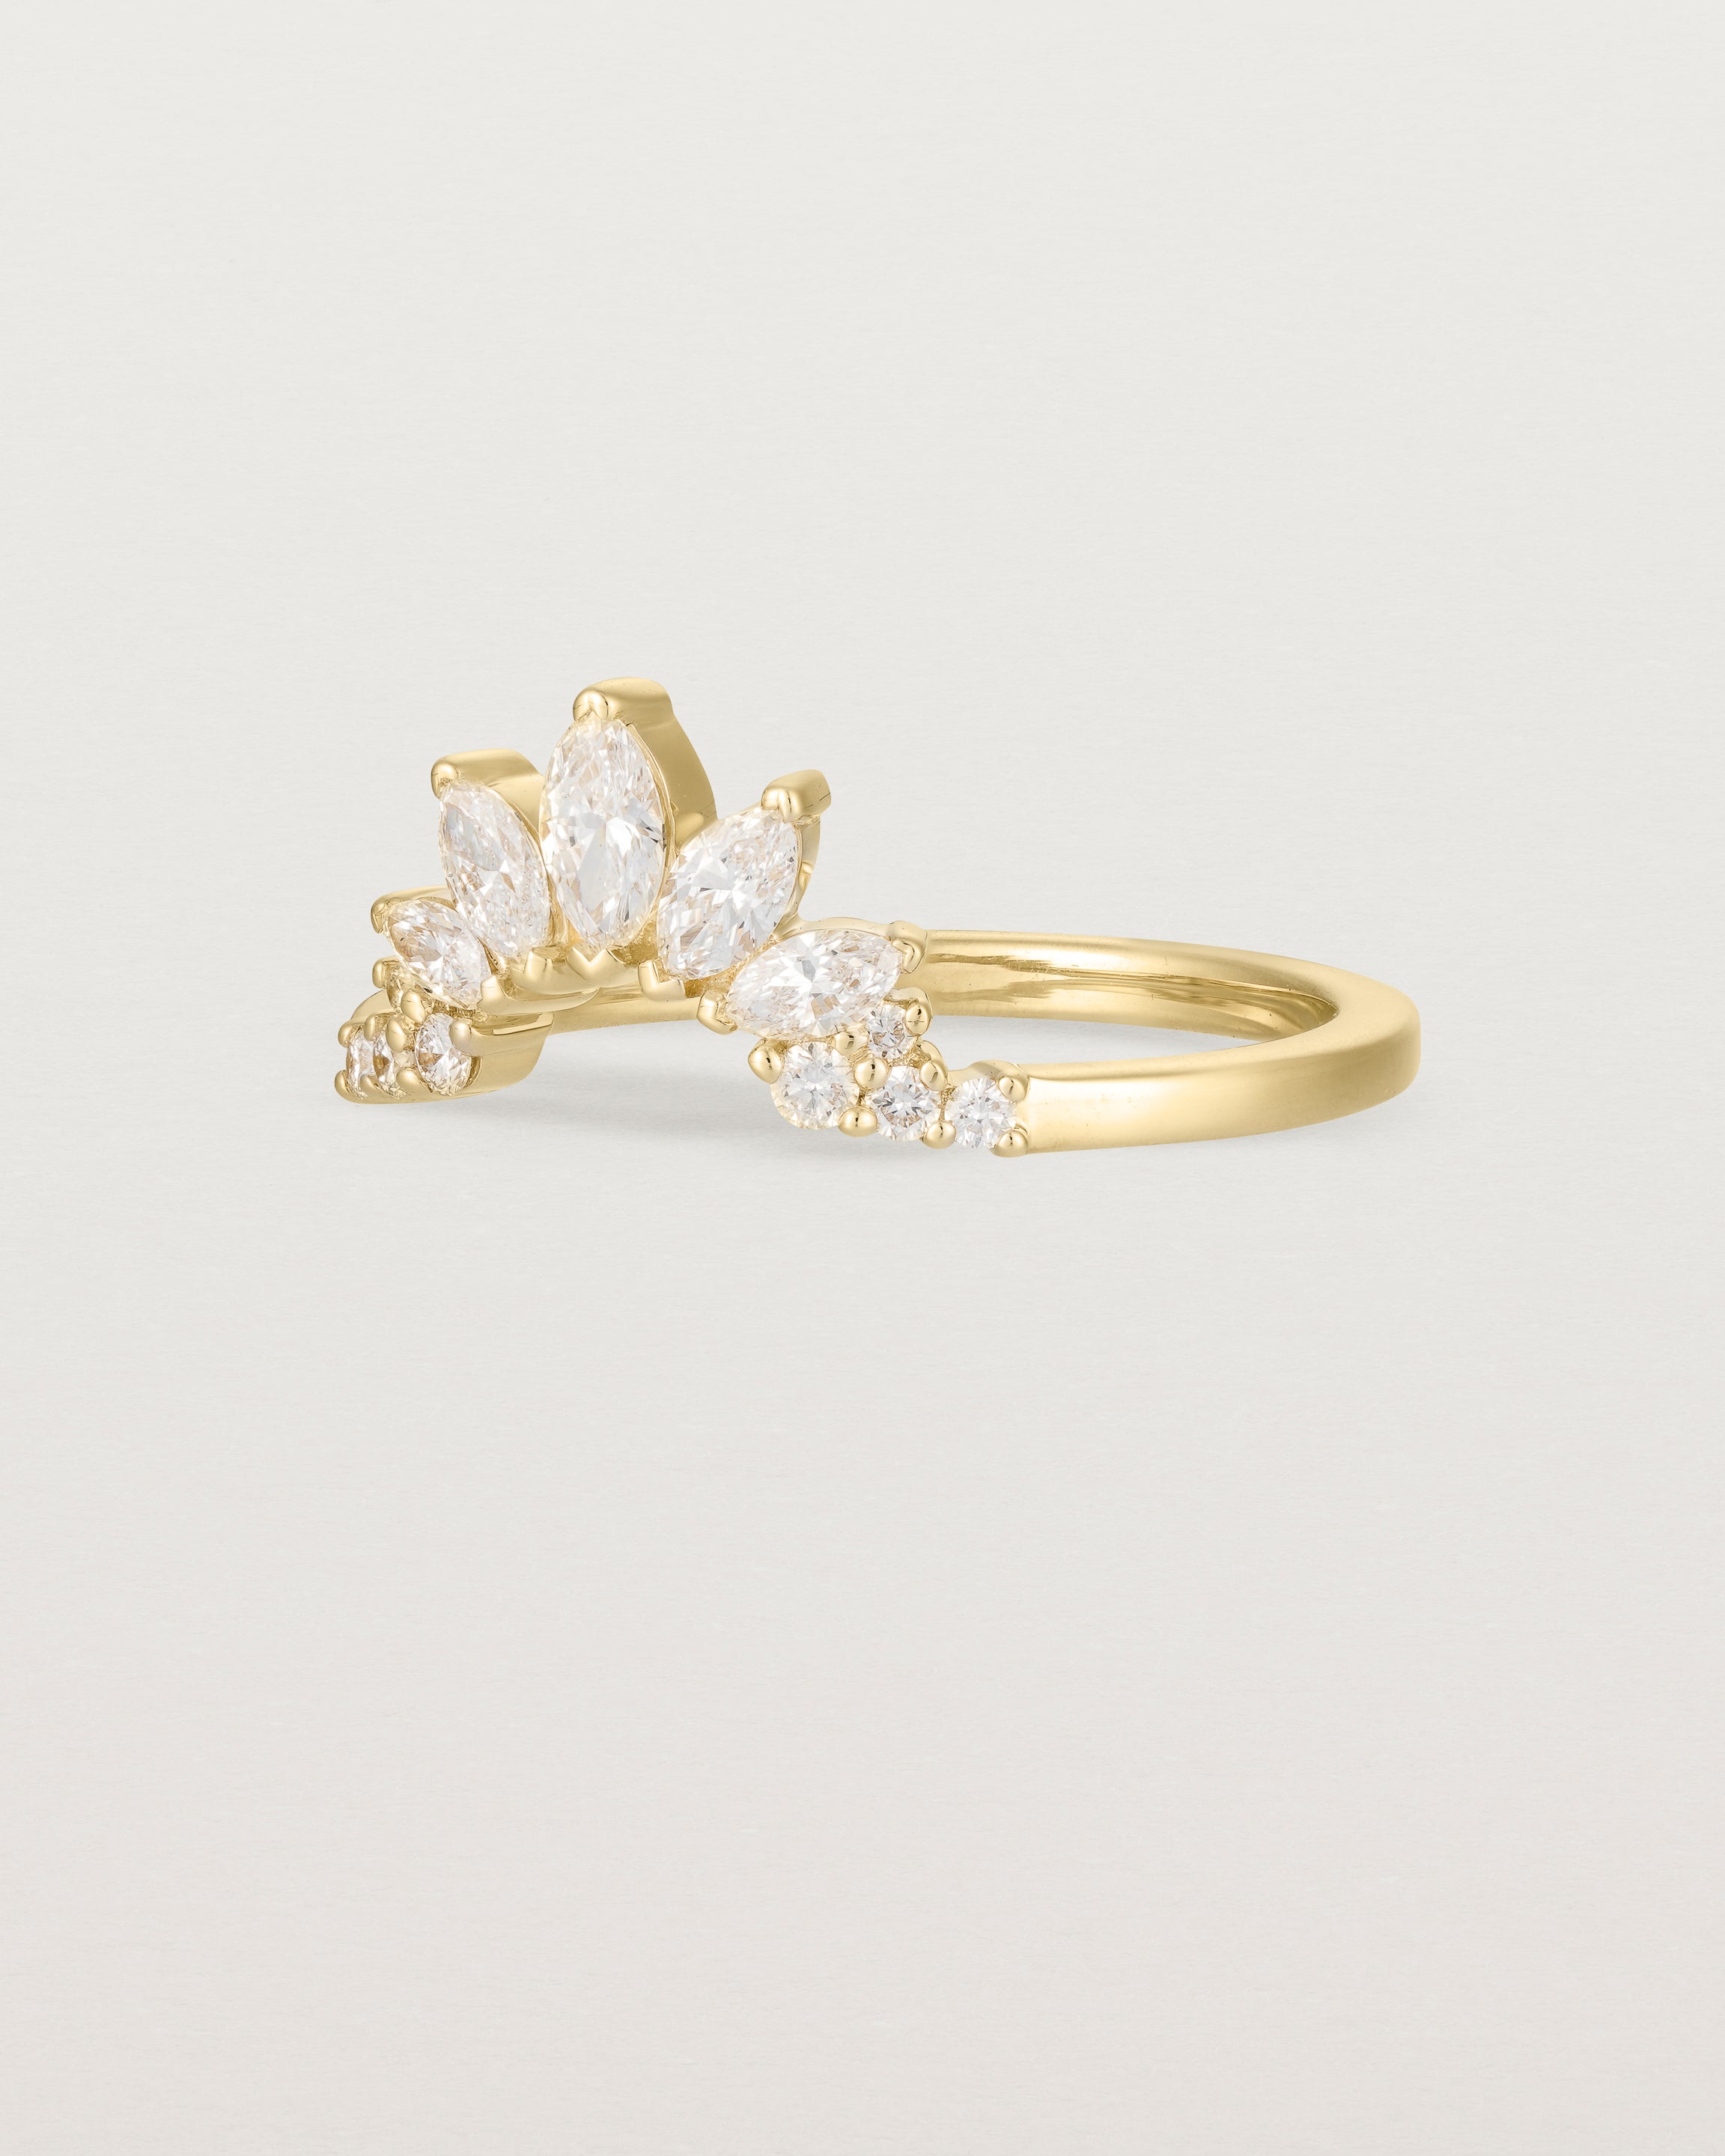 Size three of a sun-bream inspired white diamond crown ring, crafted in yellow gold